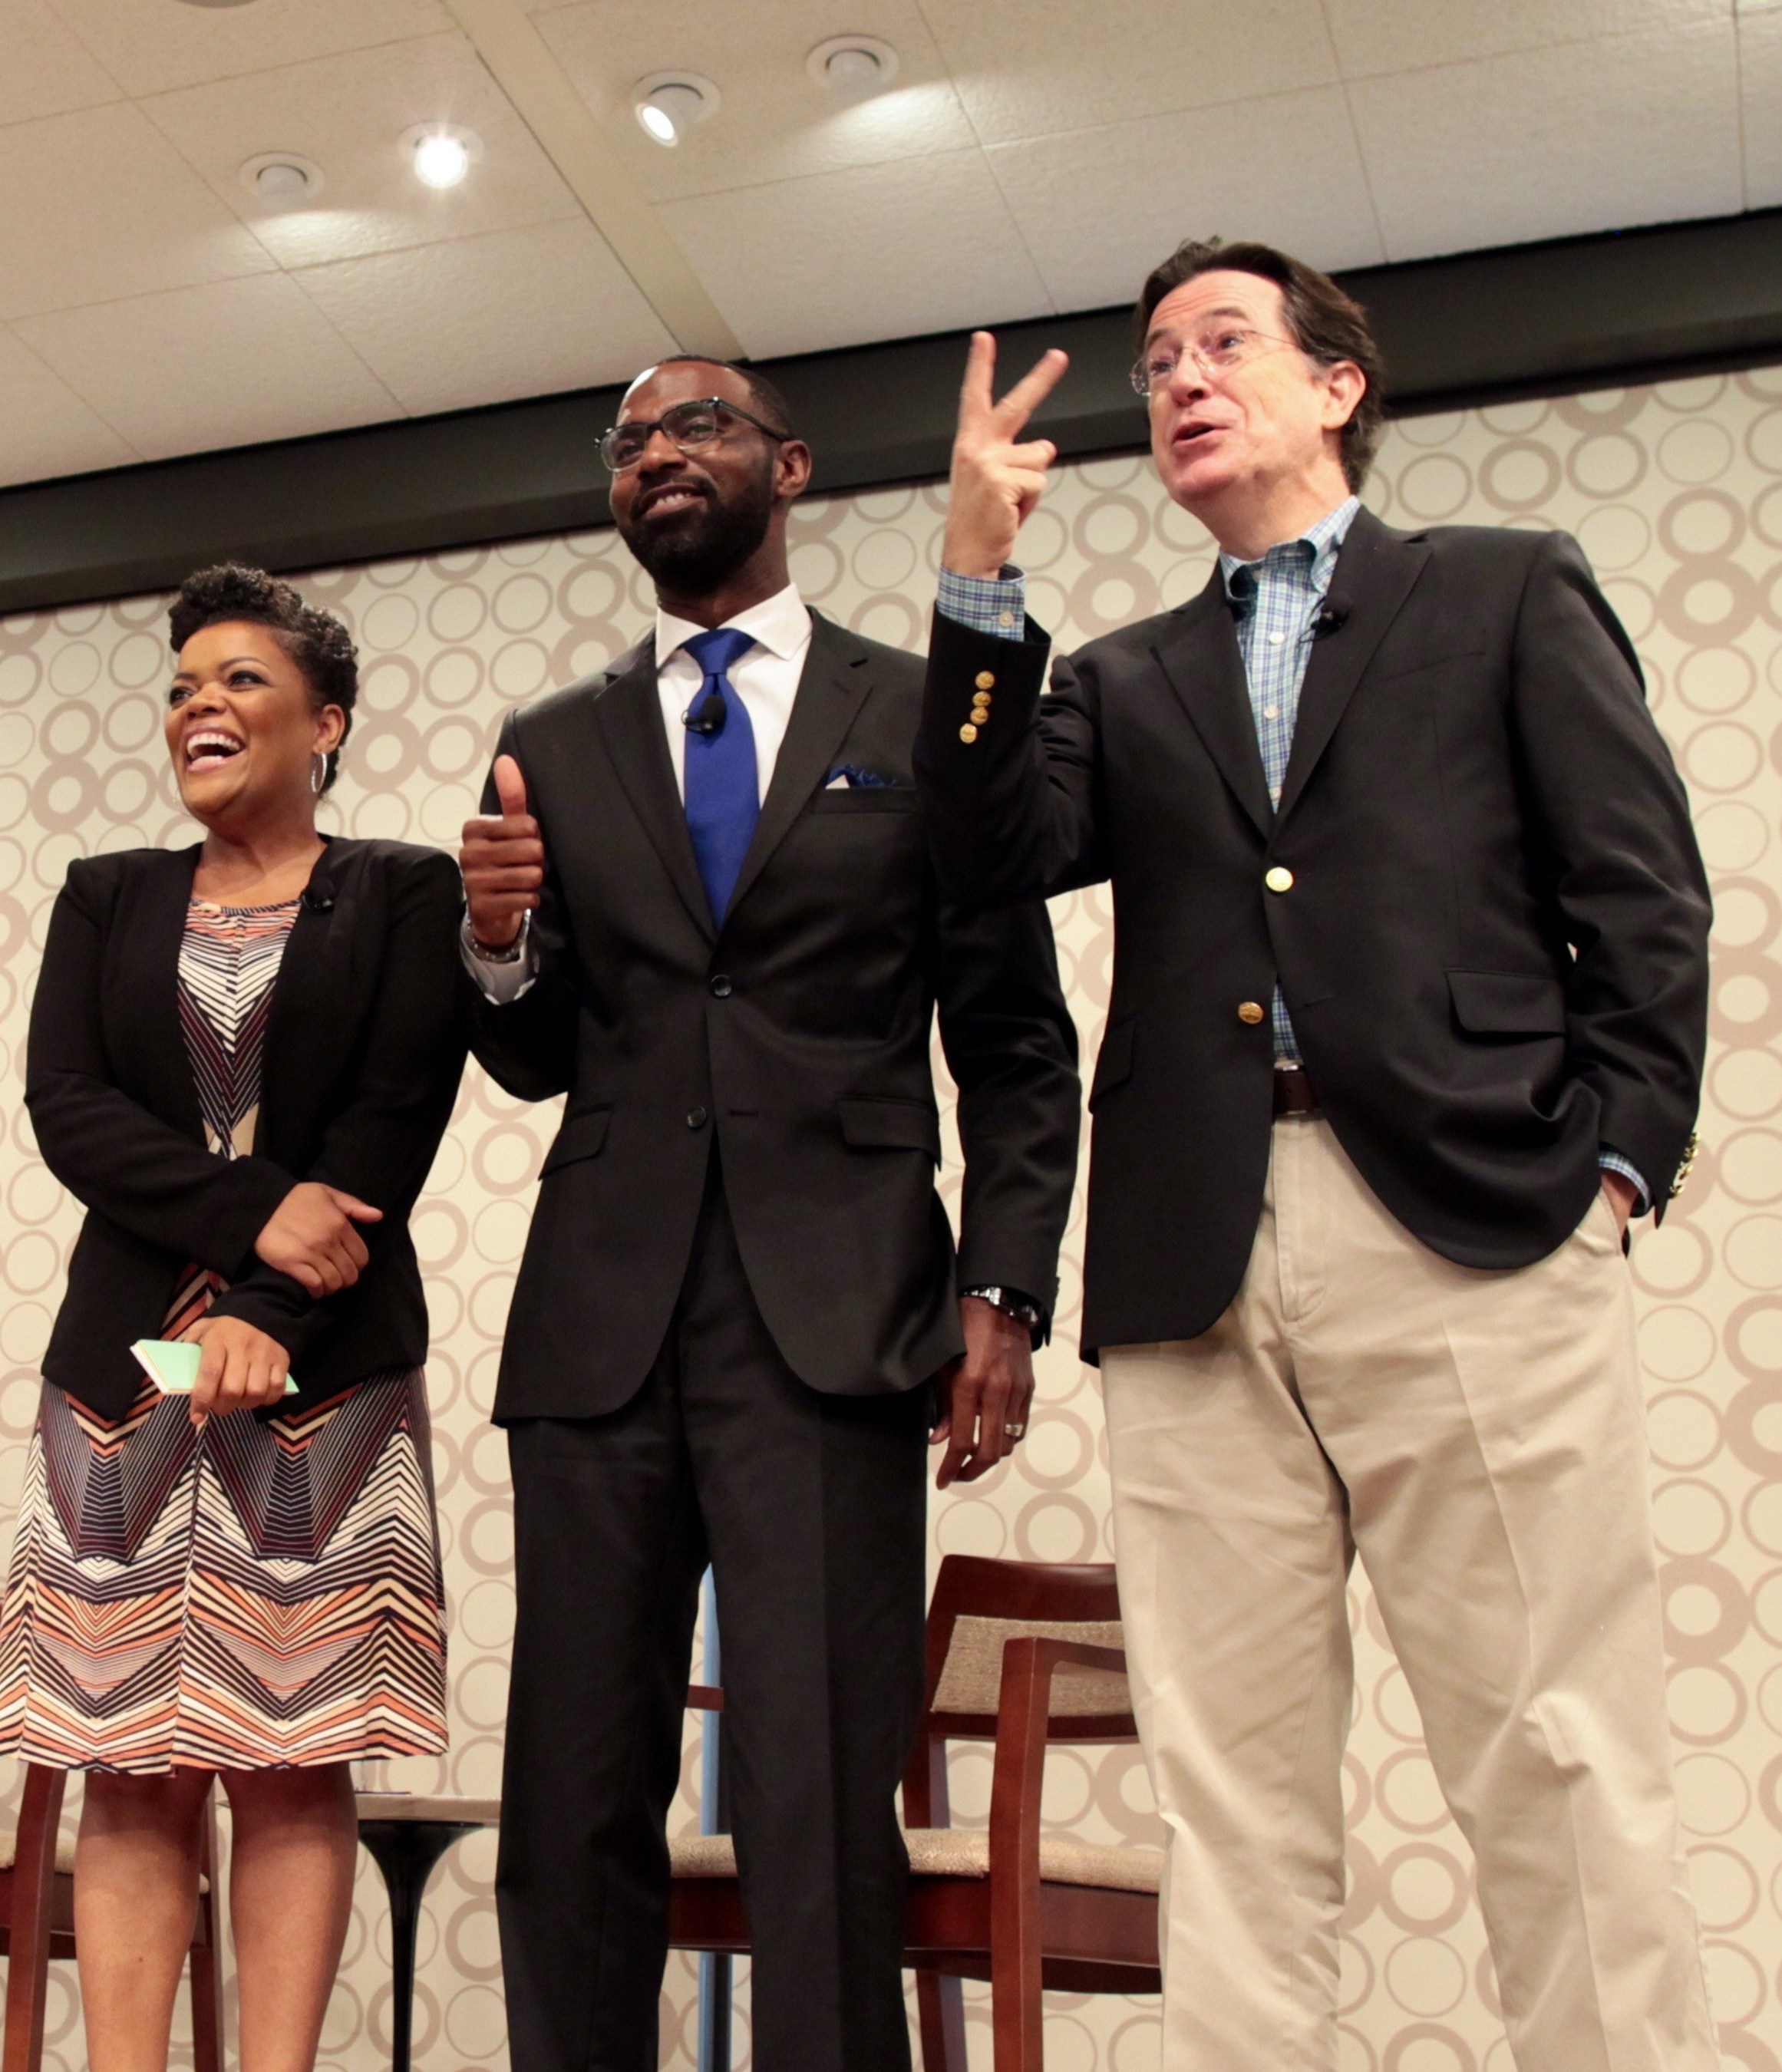 Stephen Colbert joins Yvette Nicole Brown and Damon Qualls, teacher at Alexander Elementary School in Greenville, SC, to announce the funding of nearly 1,000 classroom project from South Carolina on DonorsChoose.org.